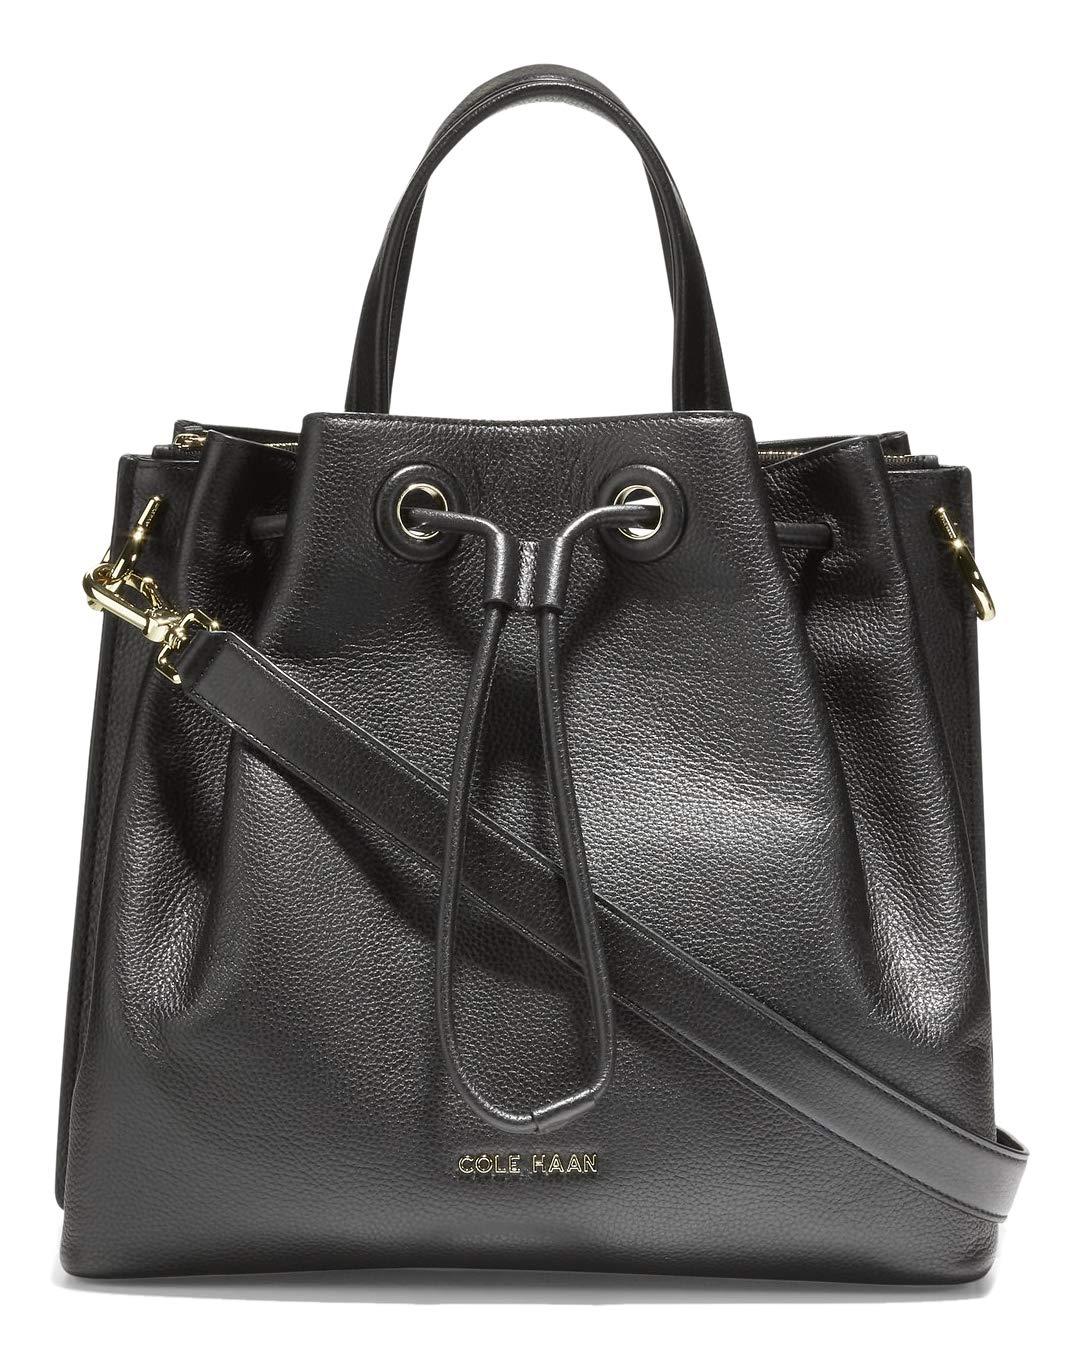 Cole Haan Leather Bucket Bag in Black - Save 55% - Lyst